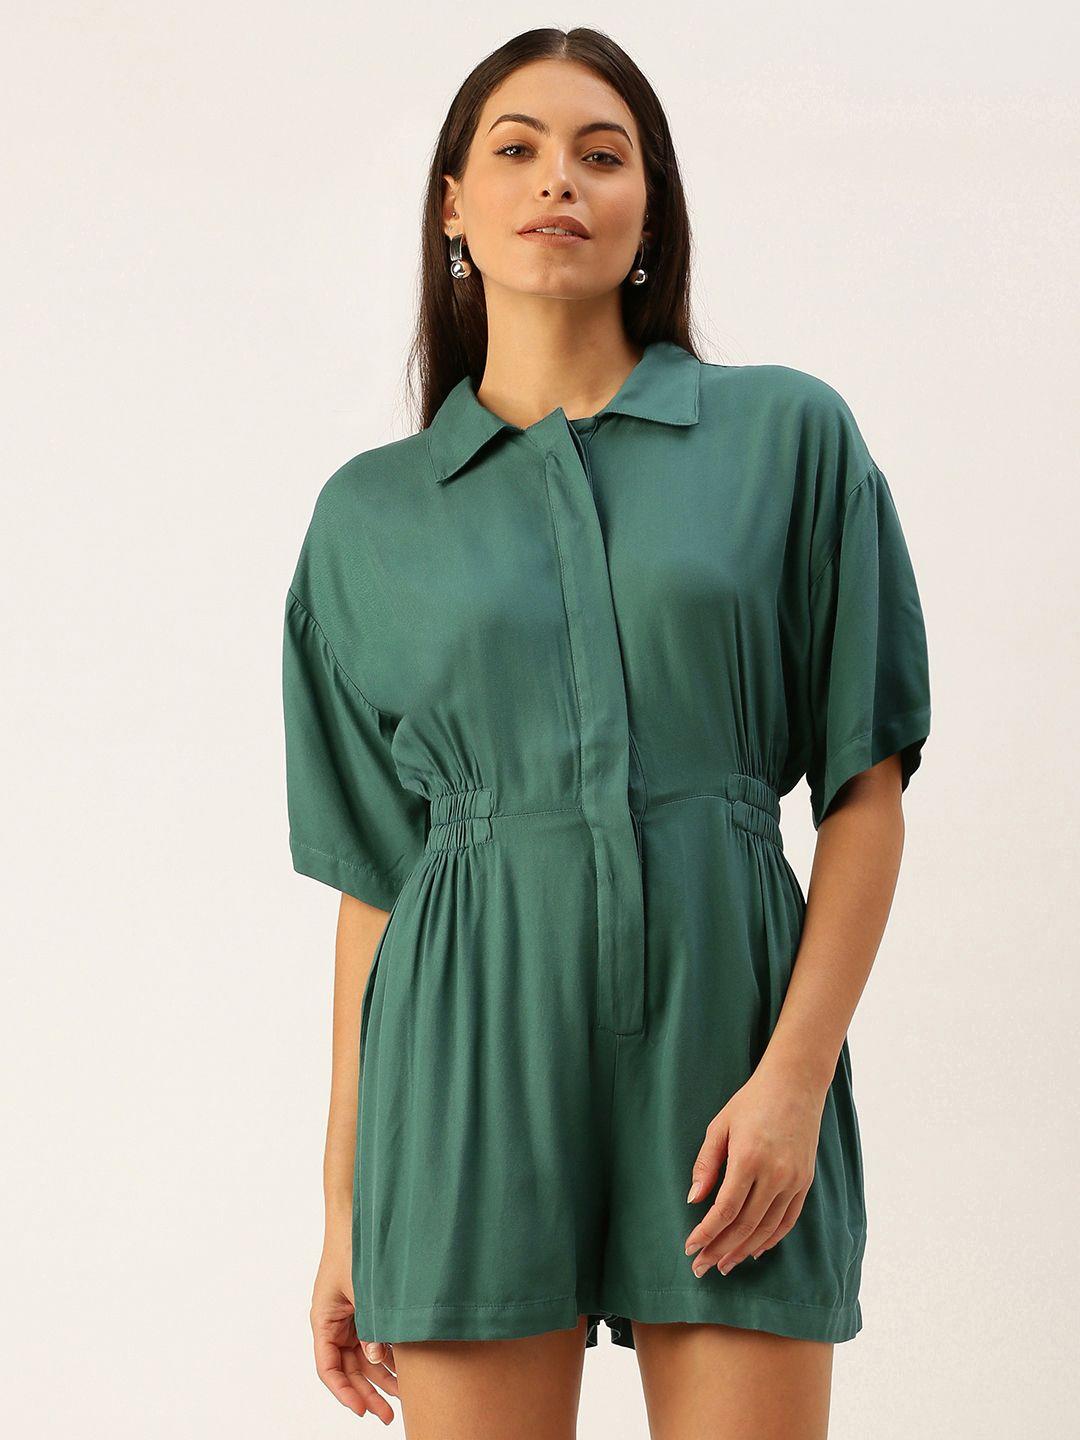 forever 21 women teal green solid shirt-collar playsuit